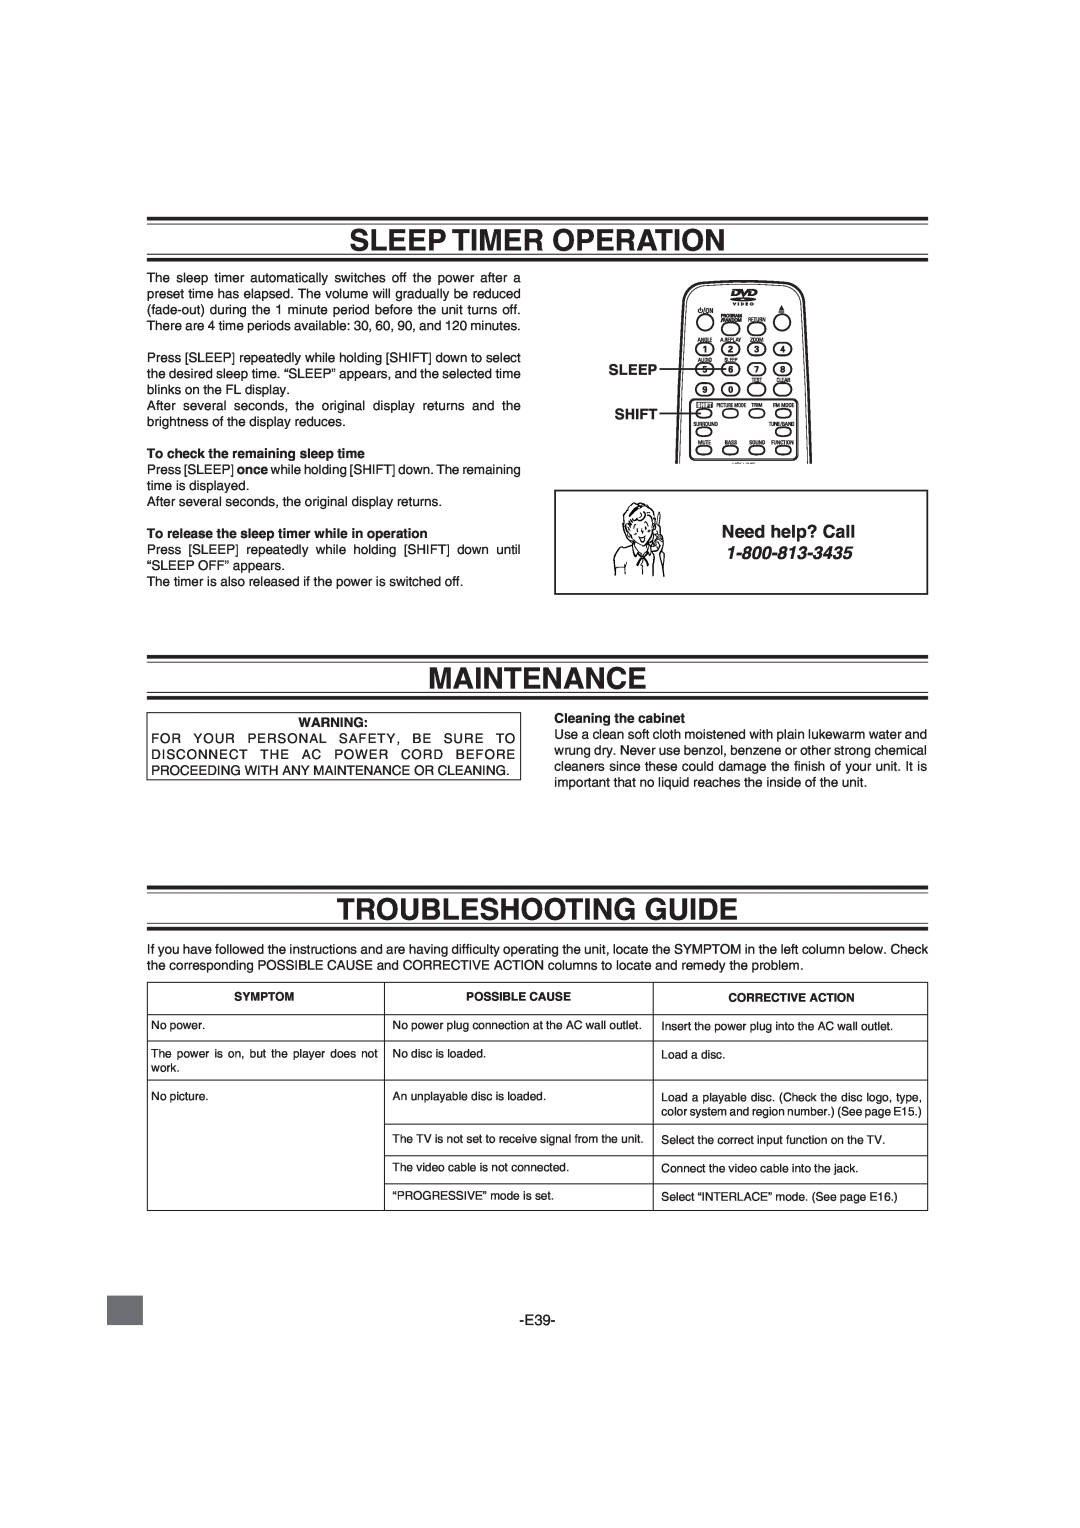 Sanyo DWM-2600 Sleep Timer Operation, Maintenance, Troubleshooting Guide, Need help? Call, Cleaning the cabinet 